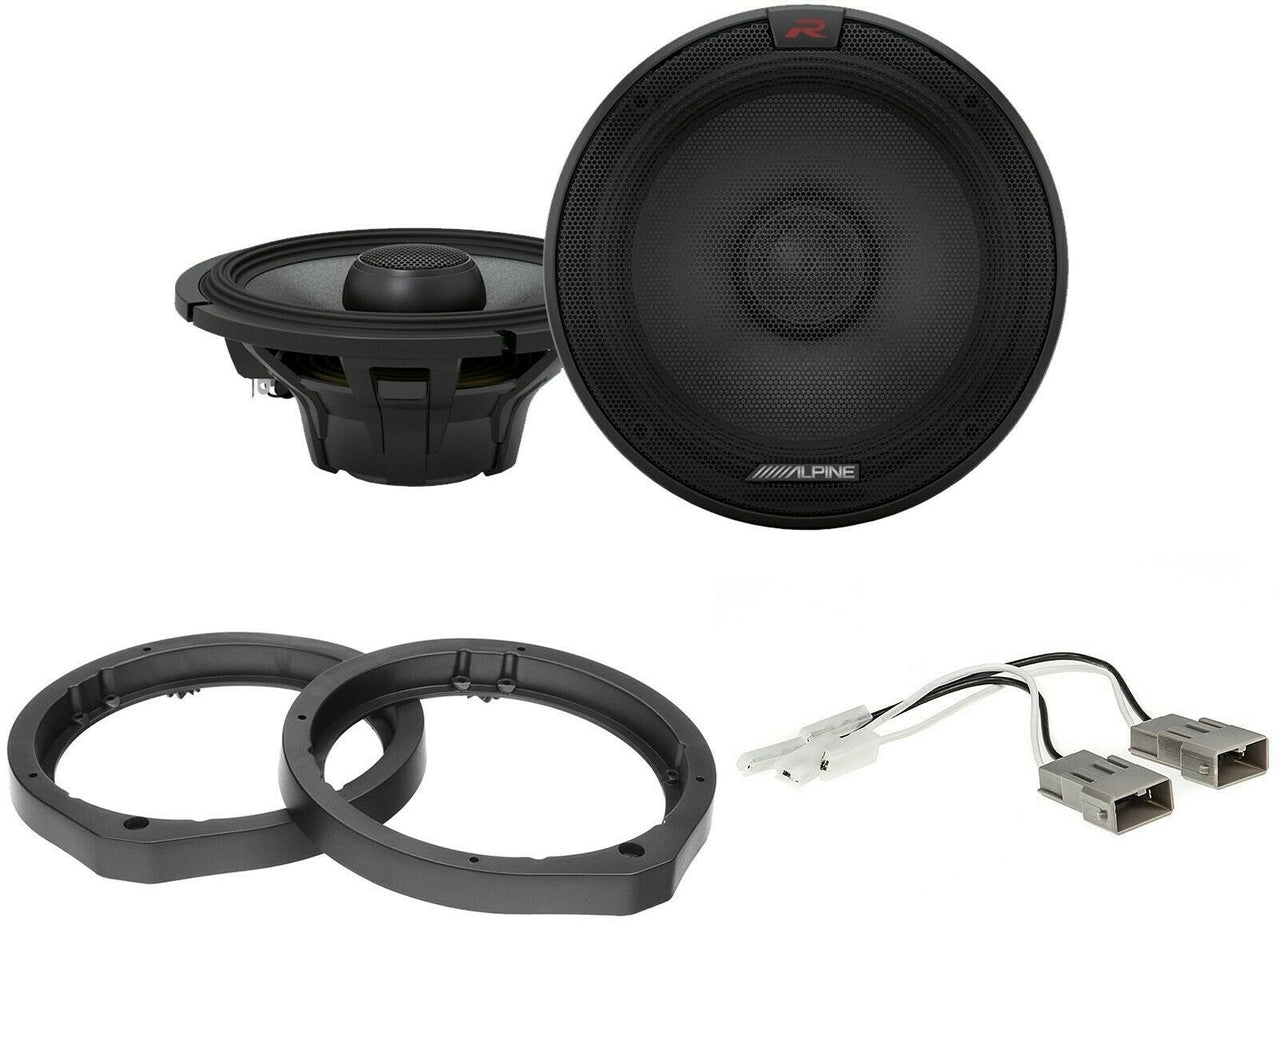 Alpine R-S65.2 6.5" Speaker Package With Speaker Adapter and Harness For Select Honda and Acura Vehicles